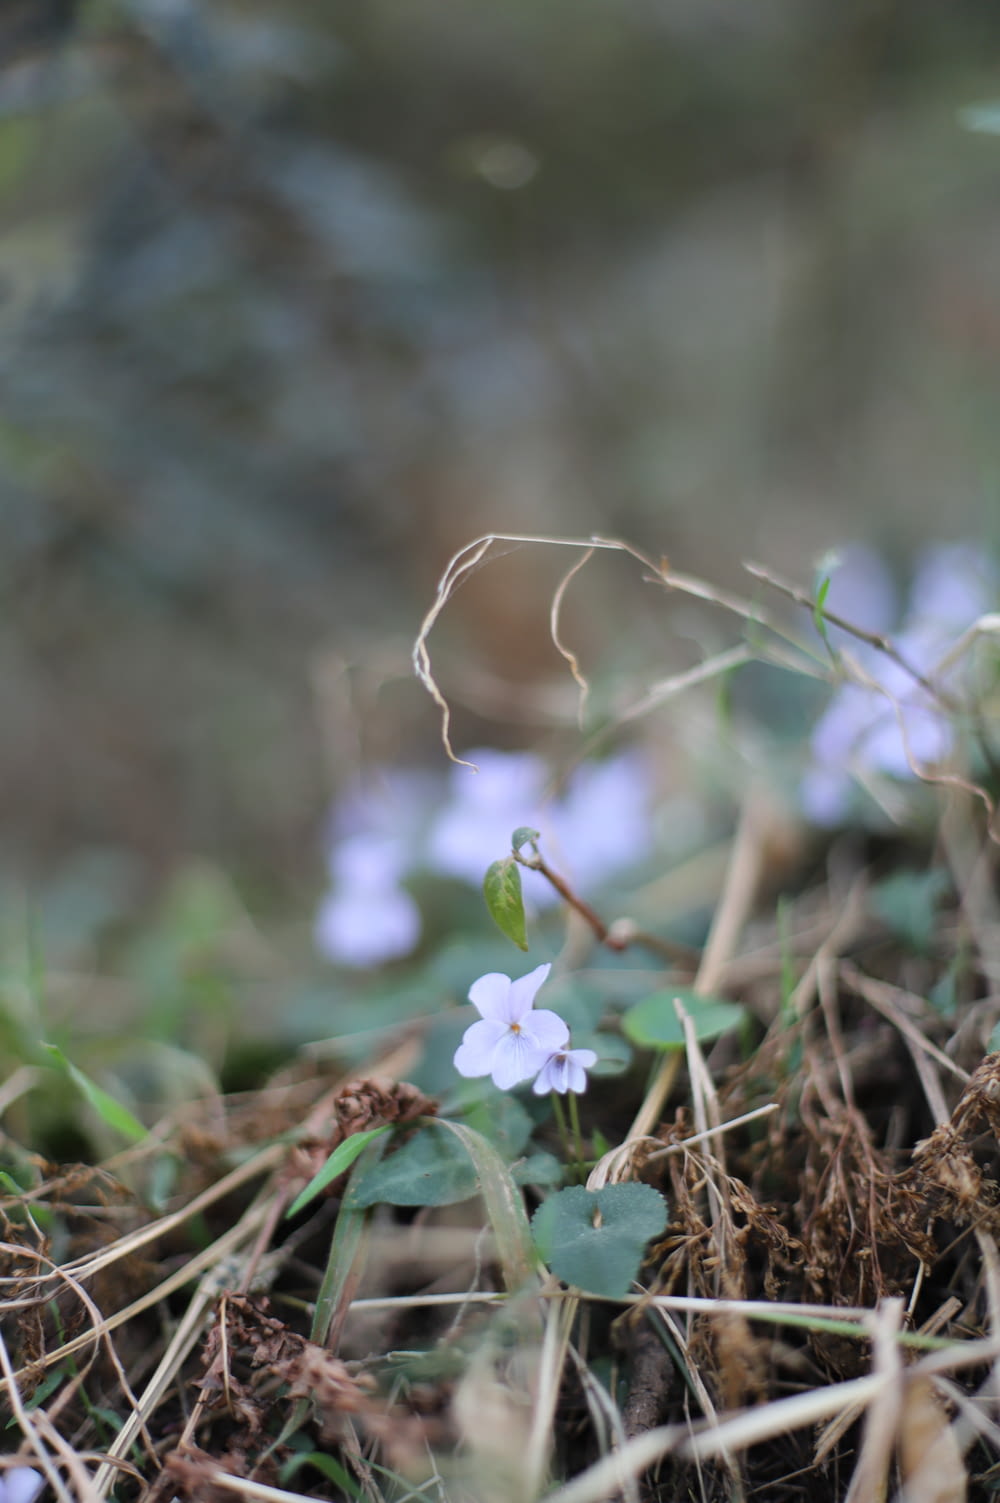 a small white flower growing out of the ground